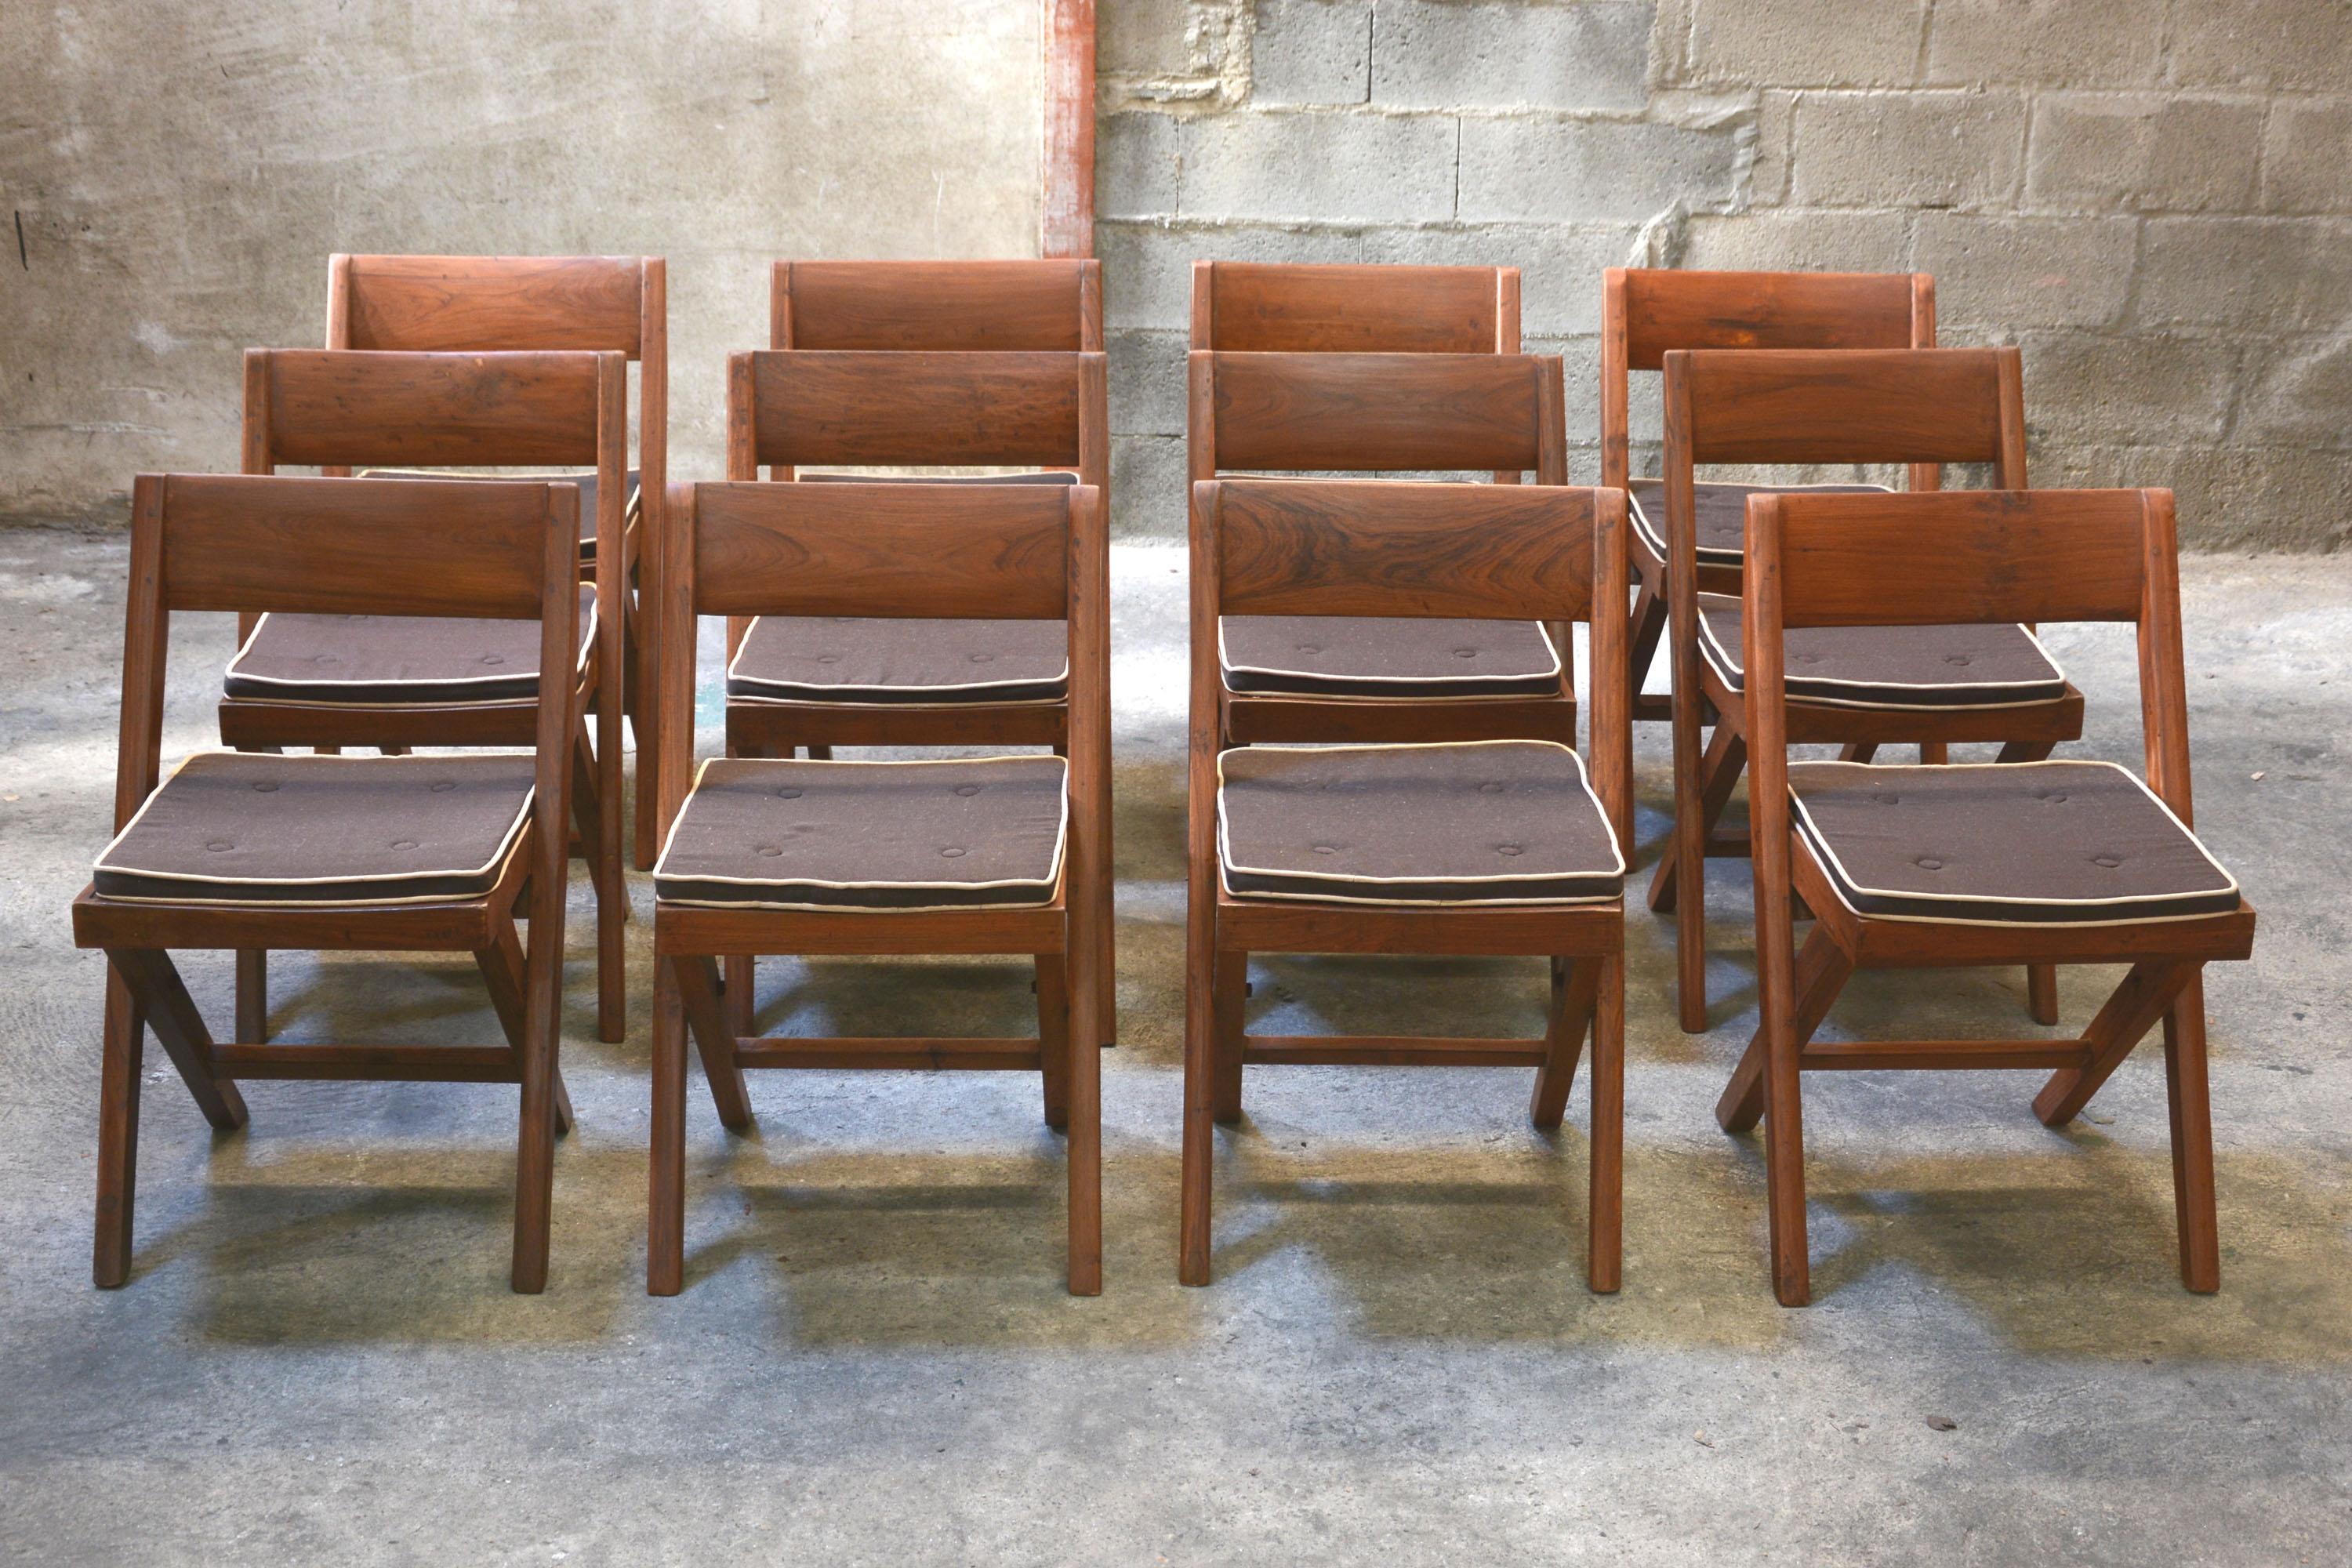 Pierre Jeanneret, unique set of 12 library chairs for the court building and the University Library in Chandigarh, India. Teak, woven cane and upholstered seat cushion featuring cloth covering. 11 Chairs have their original lettering, one Chair has